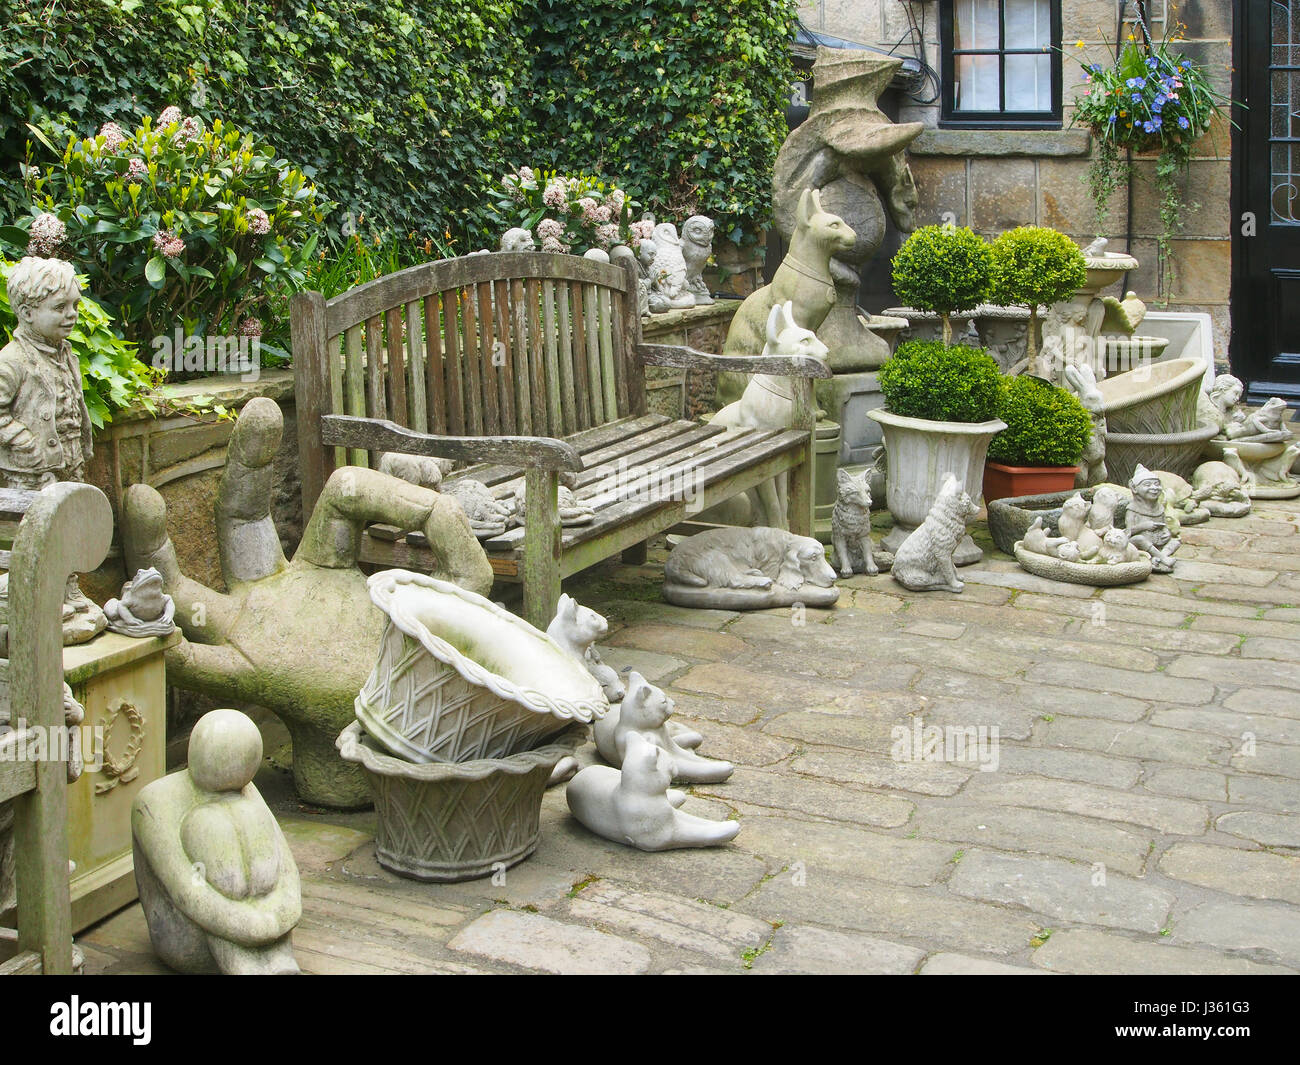 Cobbled courtyard of a shop in Montpellier Mews in Montpellier, Harrogate, Yorkshire, selling garden ornaments, including a grotesque Punch and Judy. Stock Photo